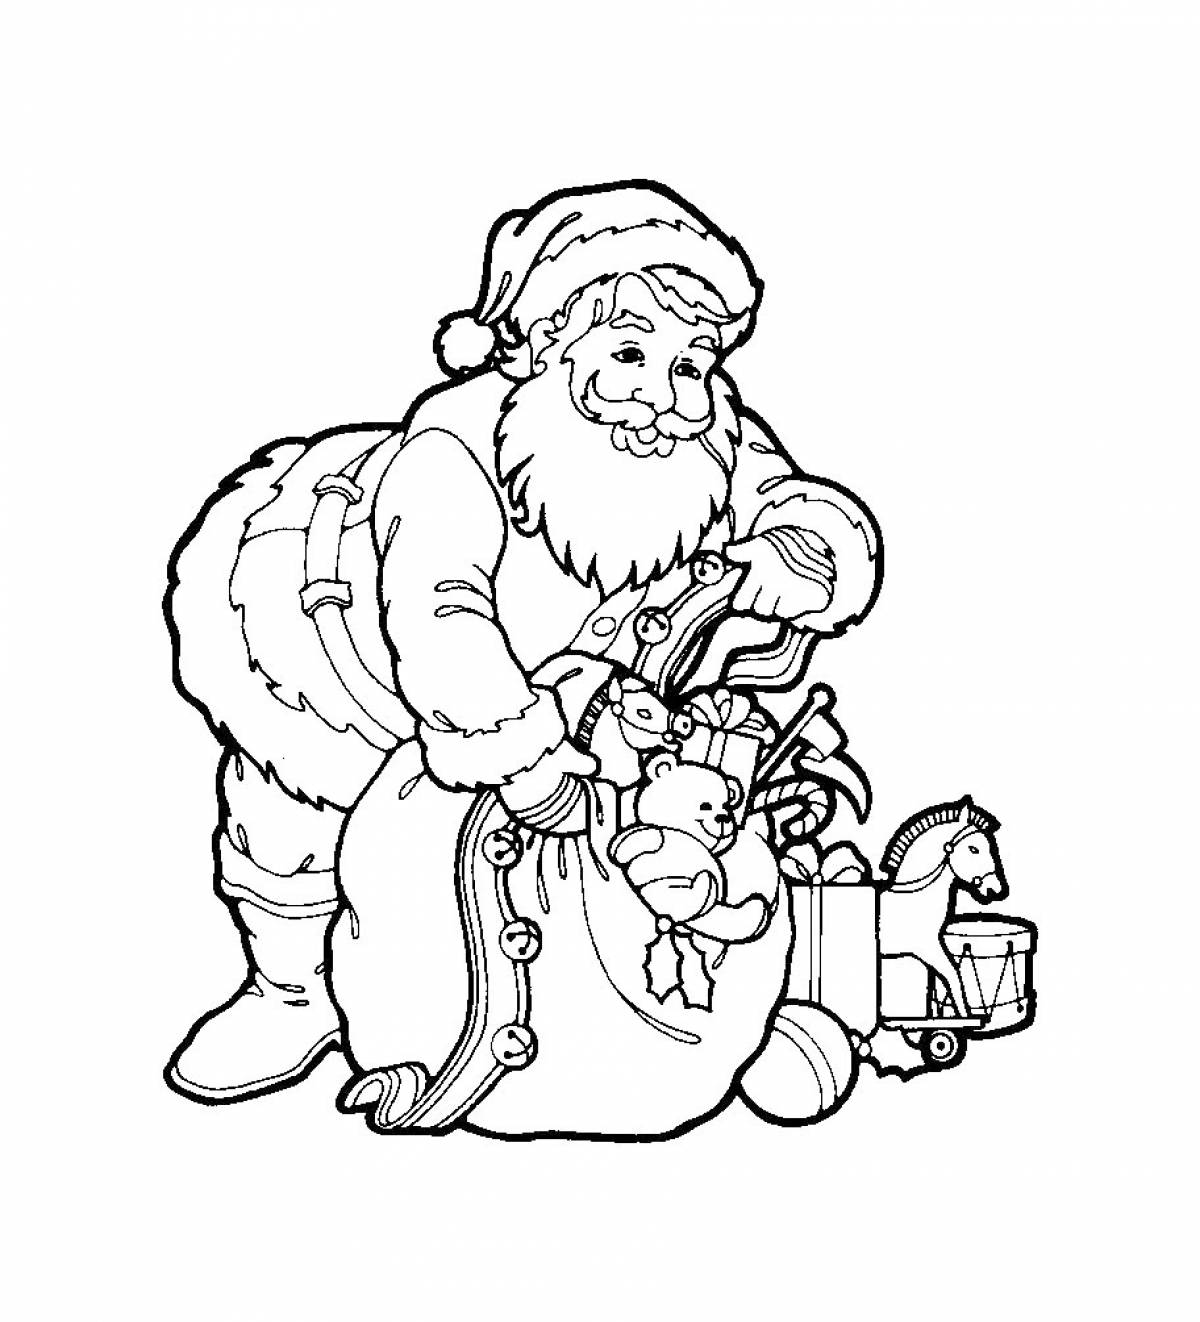 Wonderful grandfather coloring pages for kids